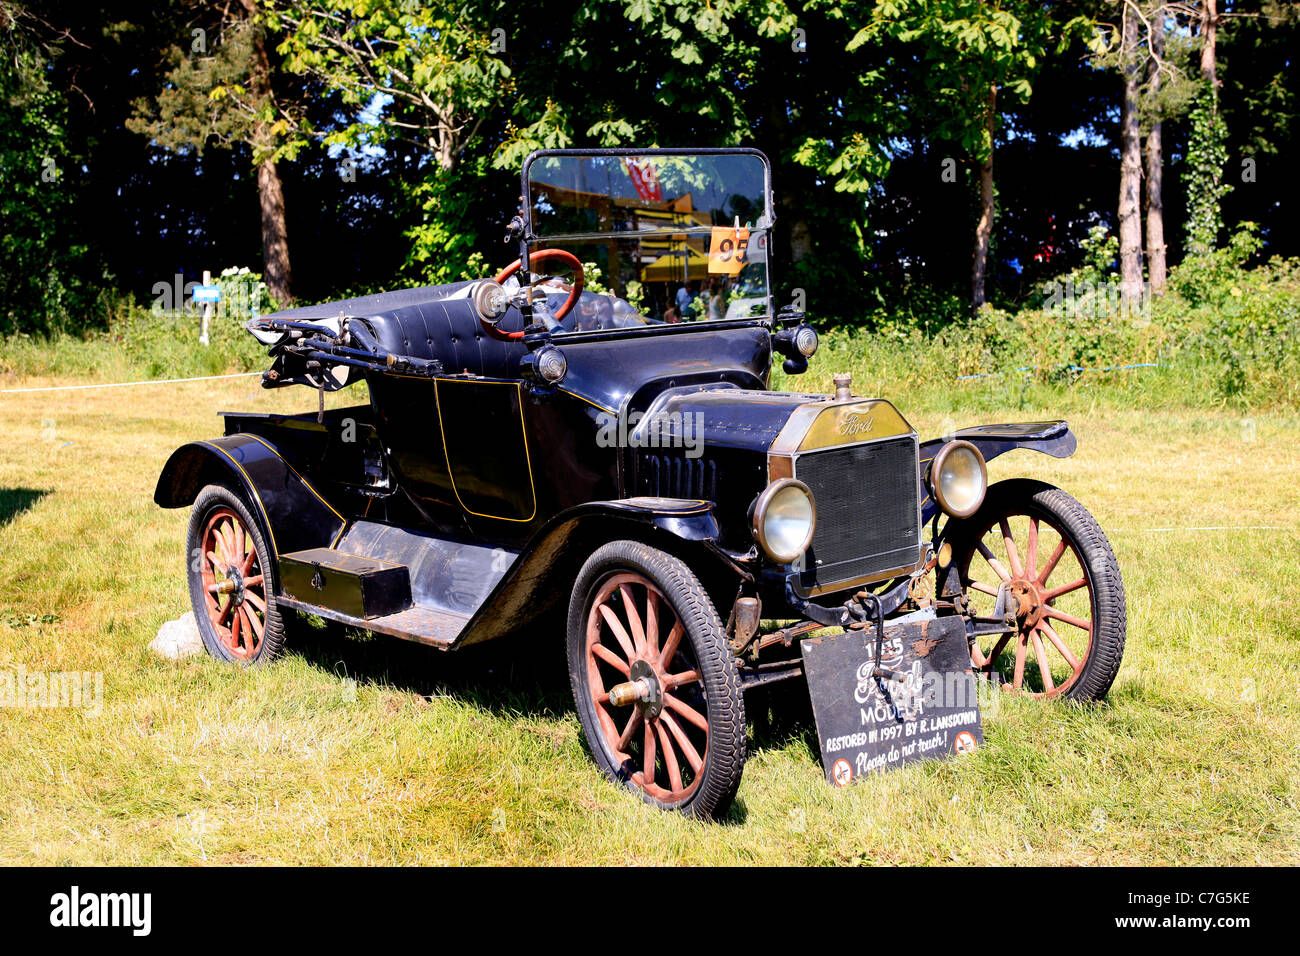 Old Ford Model T on display at a show Stock Photo